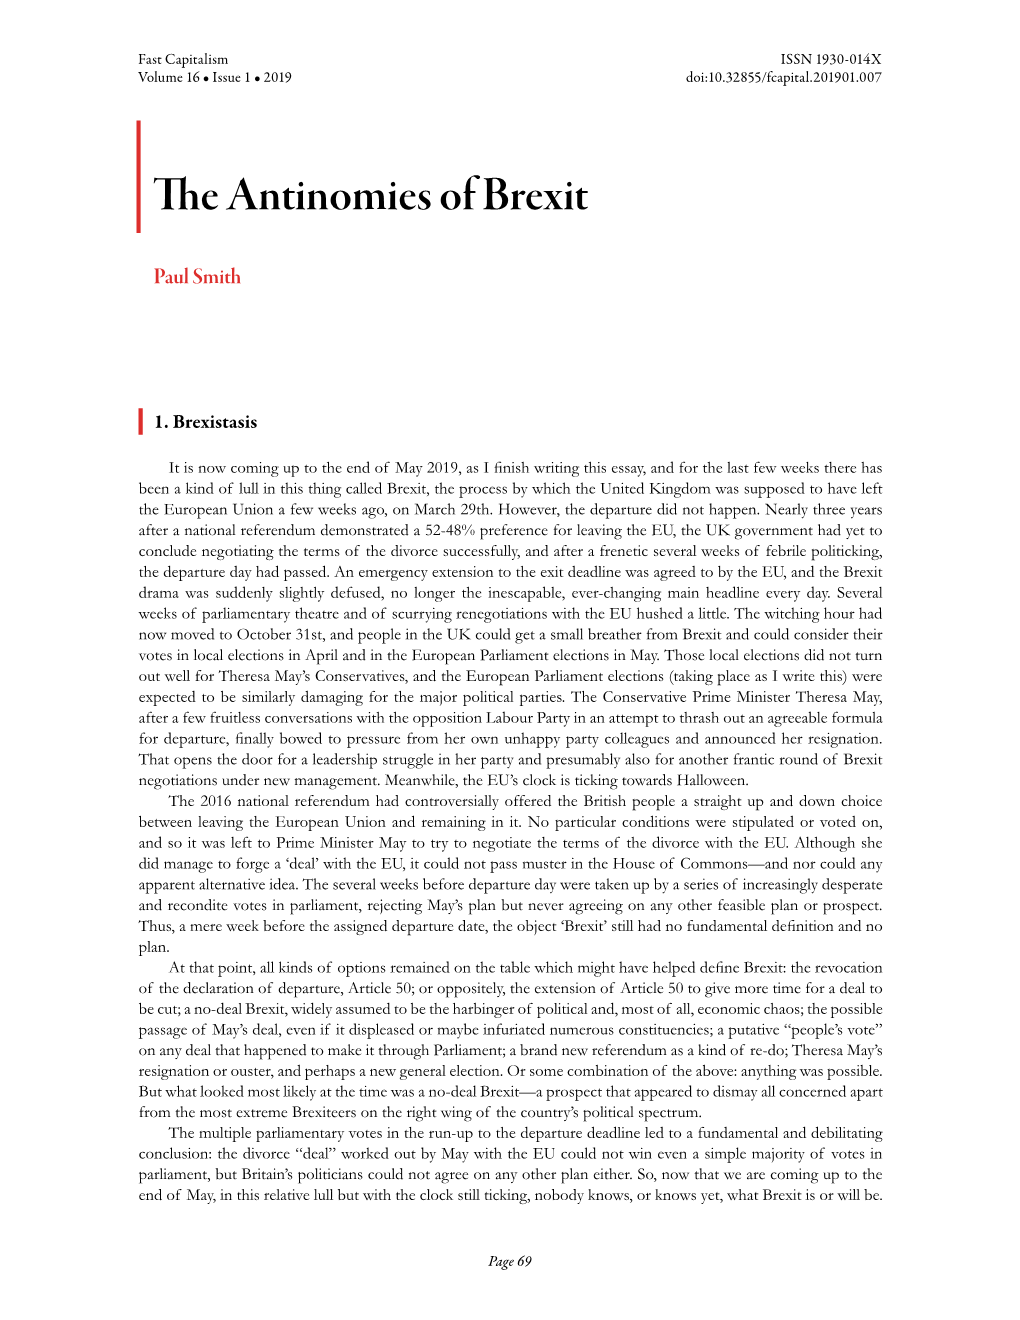 The Antinomies of Brexit